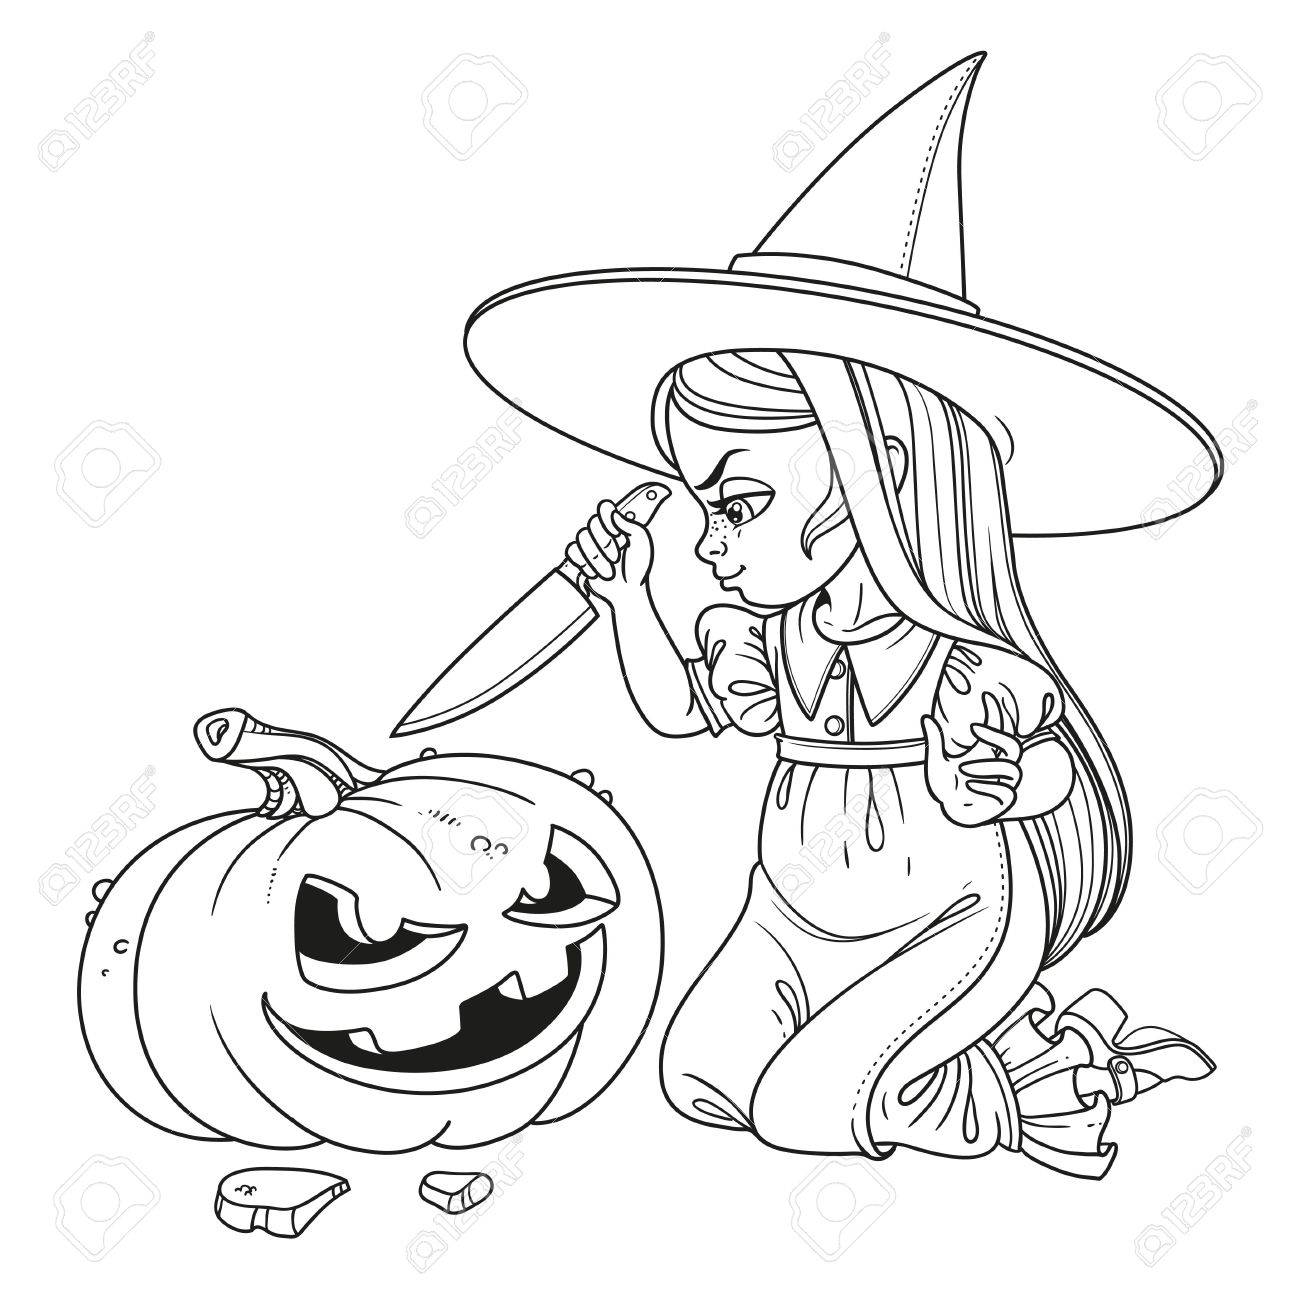 Sweet girl in witch costume sitting on the floor with a knife and cut the lantern from a pumpkin outlined coloring page royalty free svg cliparts vectors and stock illustration image